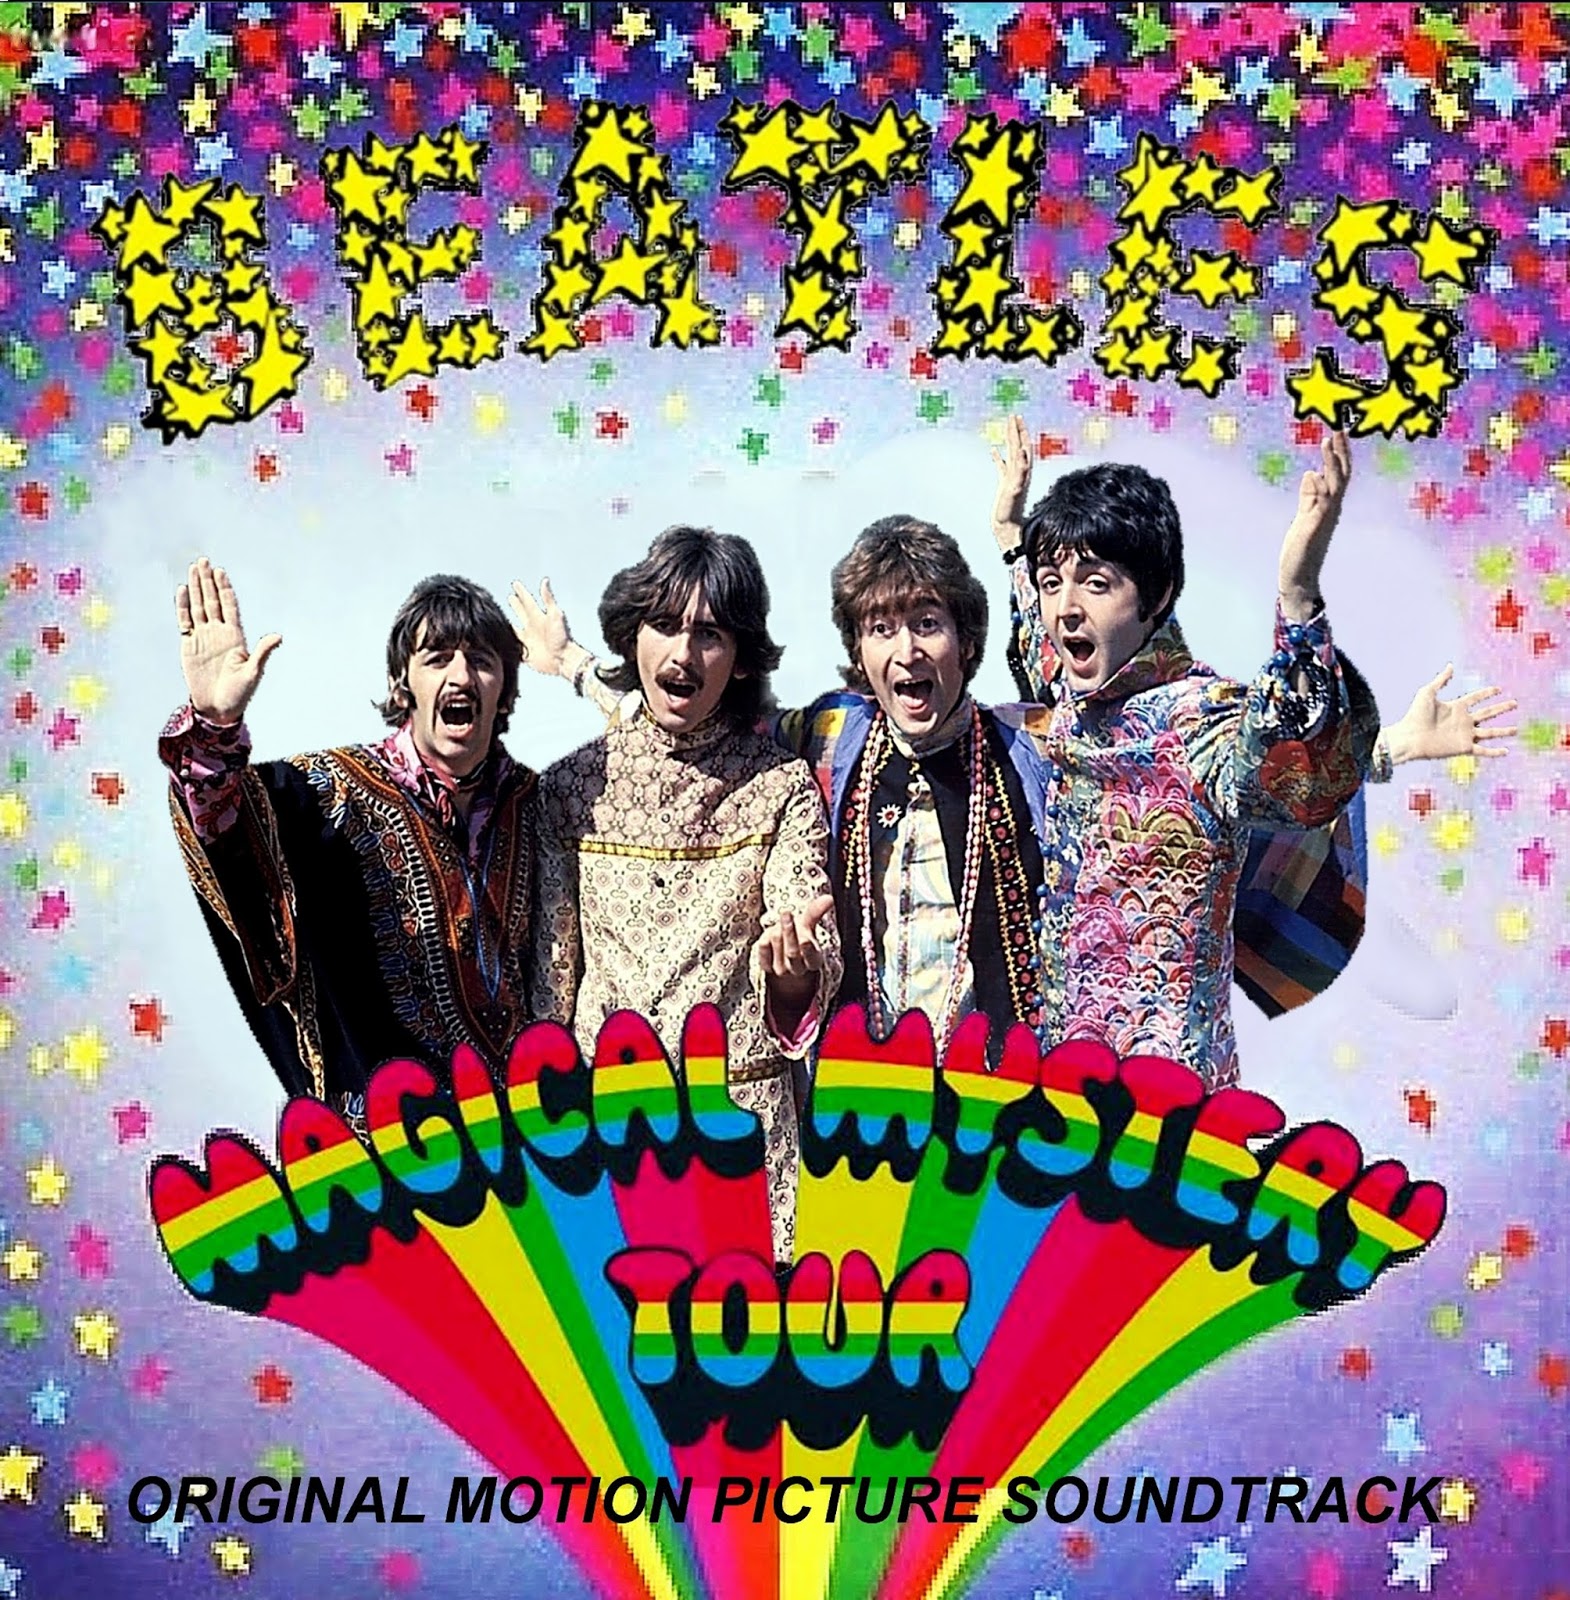 magical mystery tour song meaning